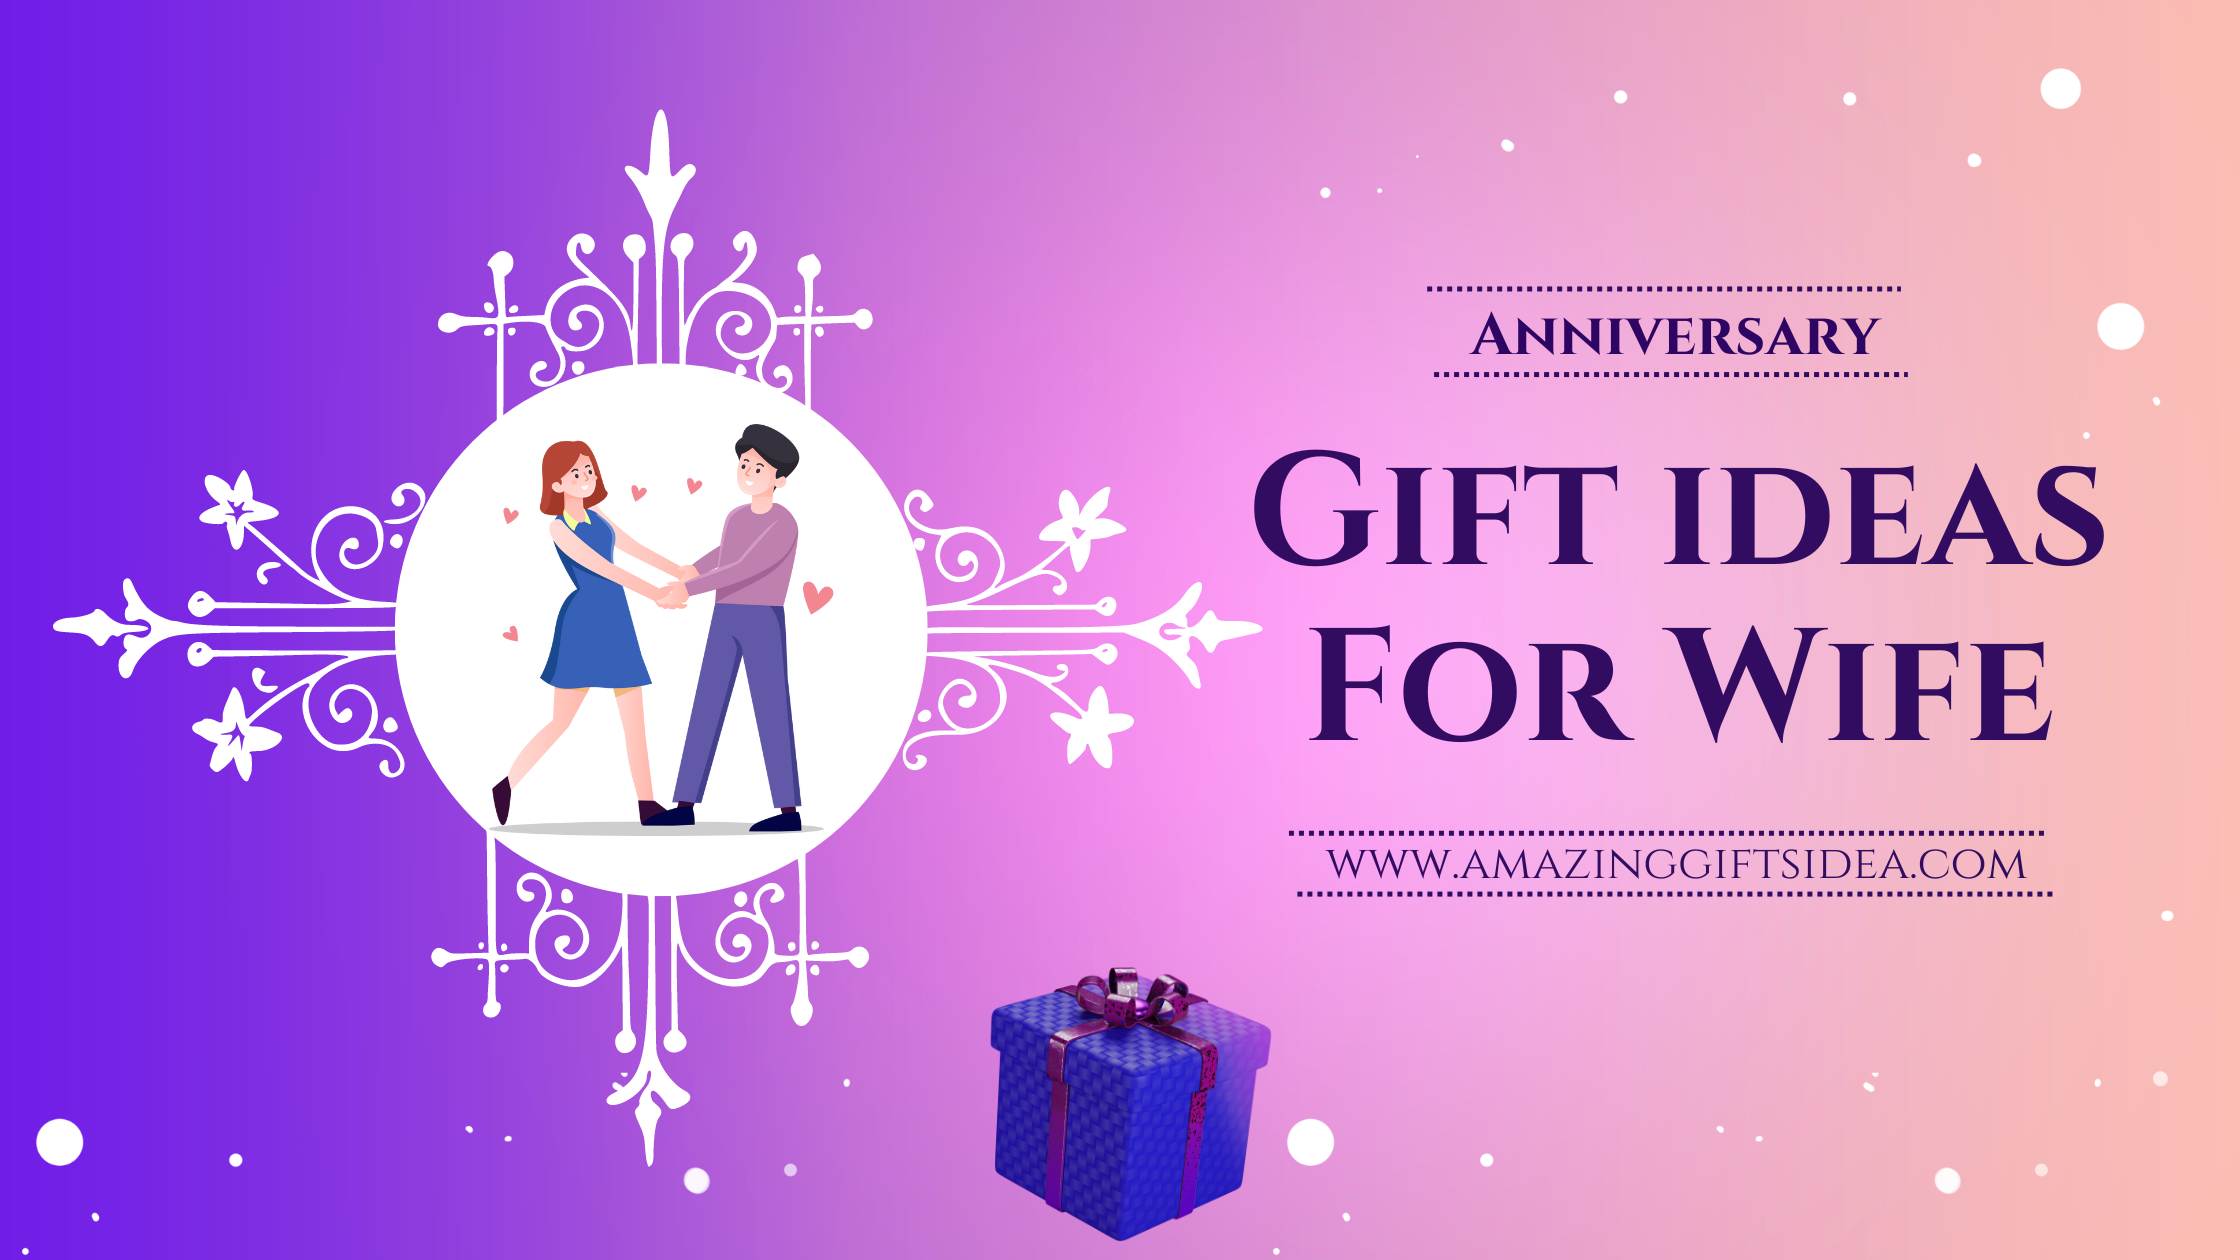 8 Unique Anniversary Gift Ideas For Wife To Impress Her